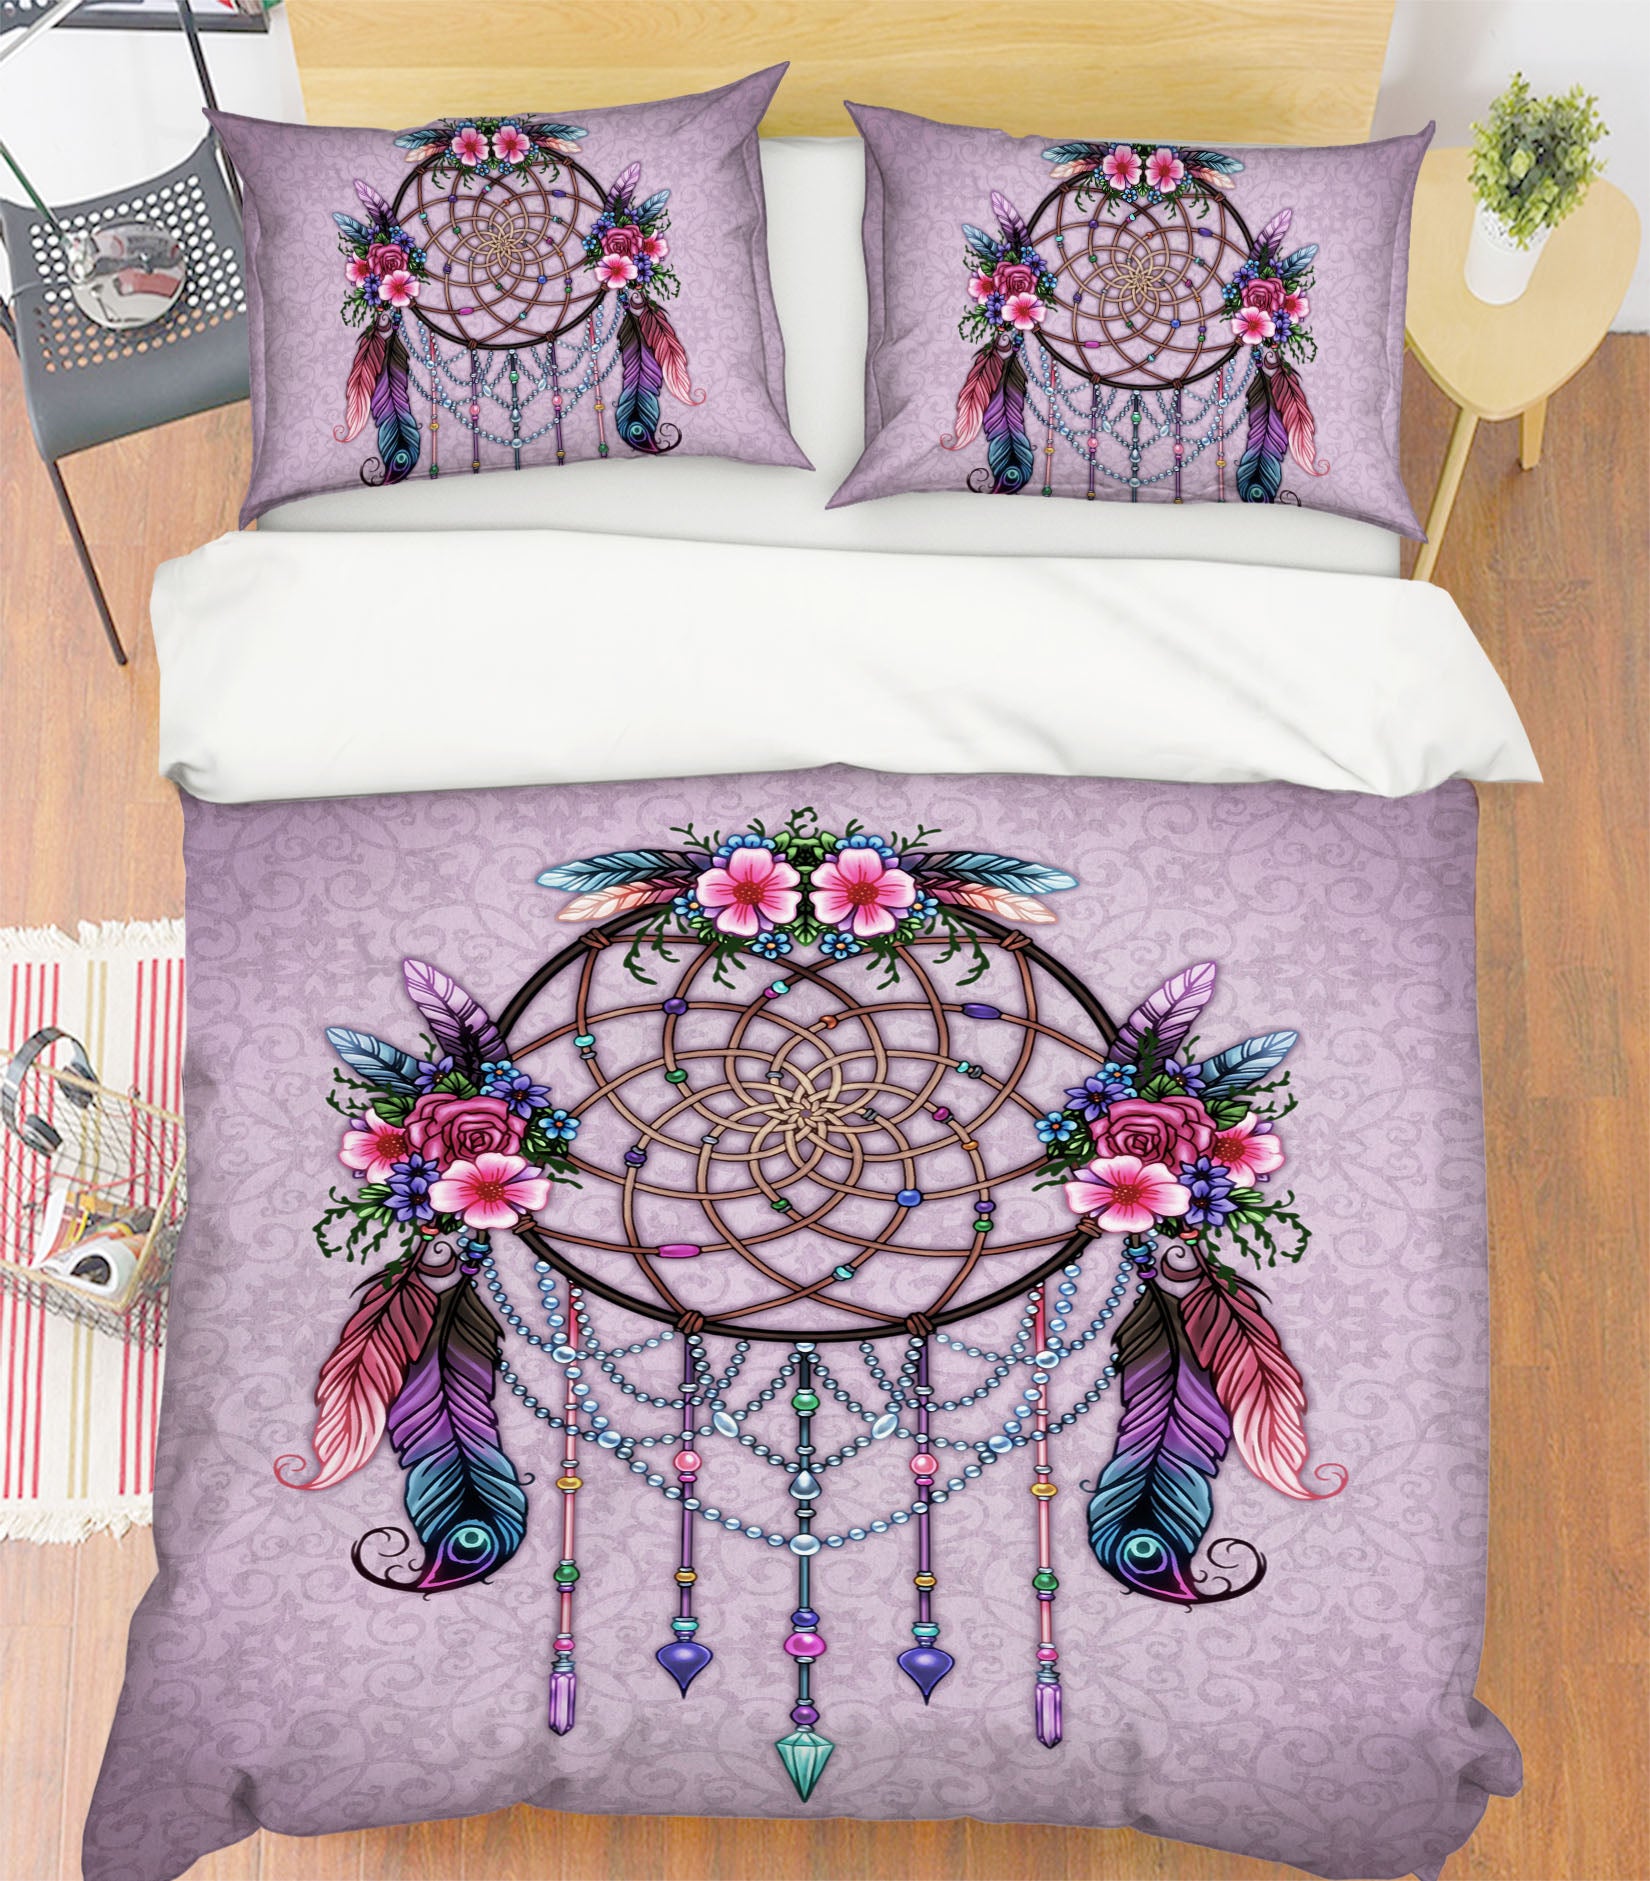 3D Feather Wind Chime 8820 Brigid Ashwood Bedding Bed Pillowcases Quilt Cover Duvet Cover